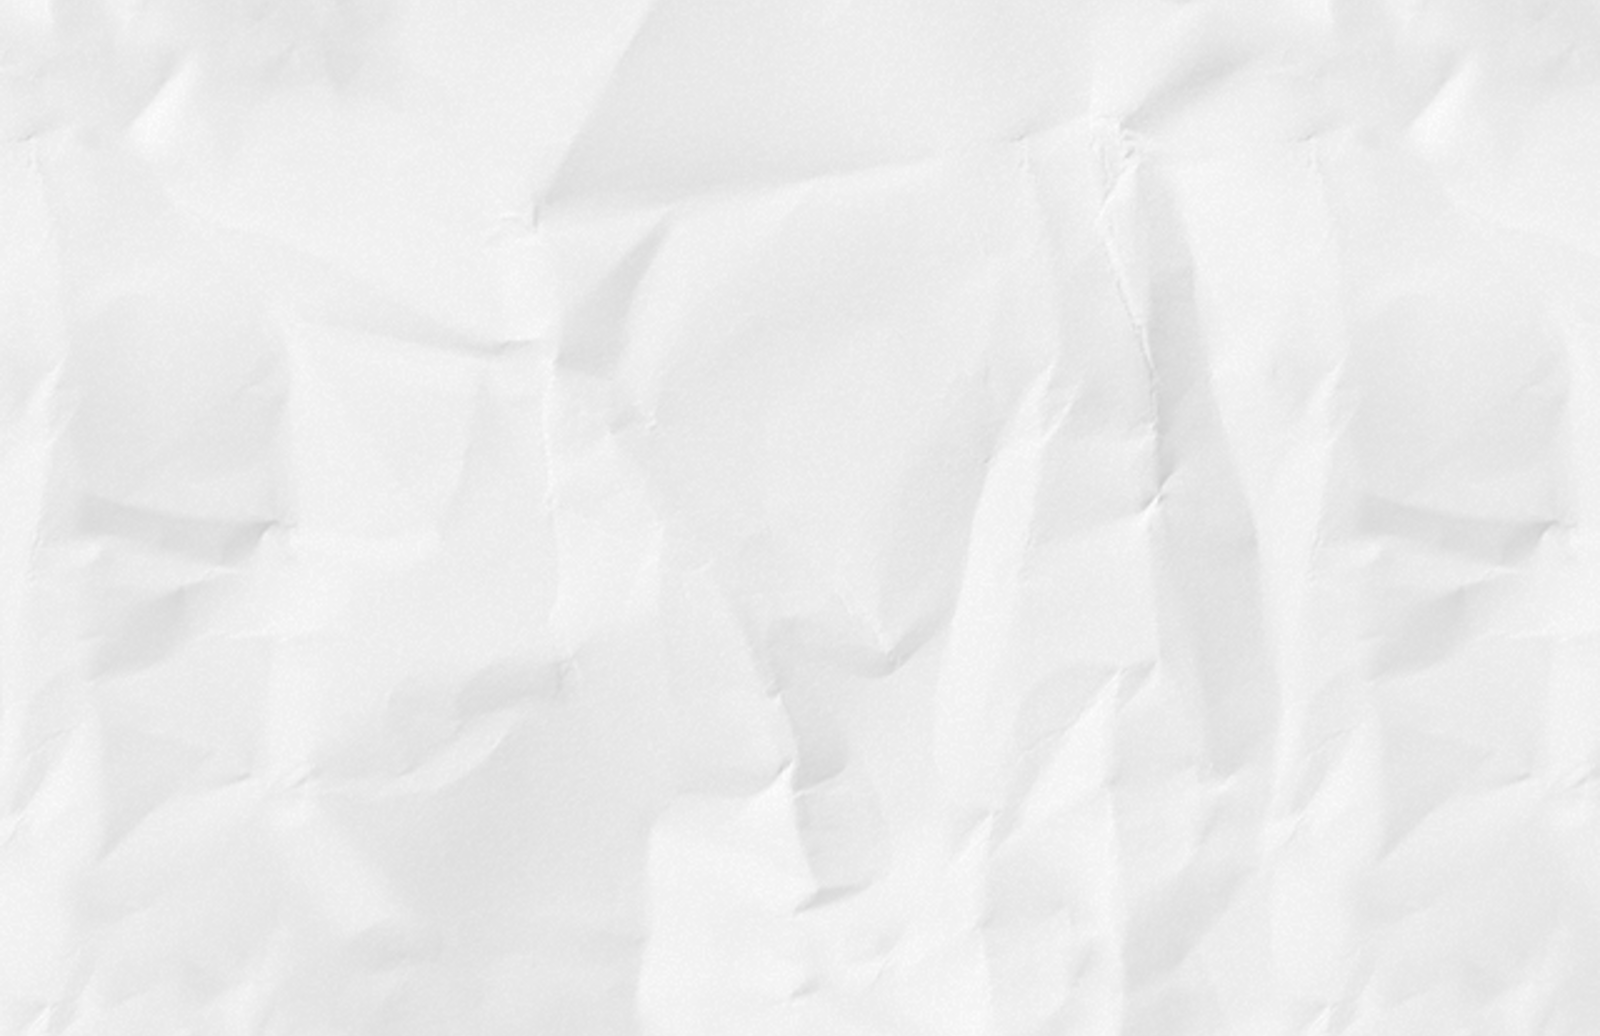 Papertexture View Of White Crumpled Paper Photo Sunwalls